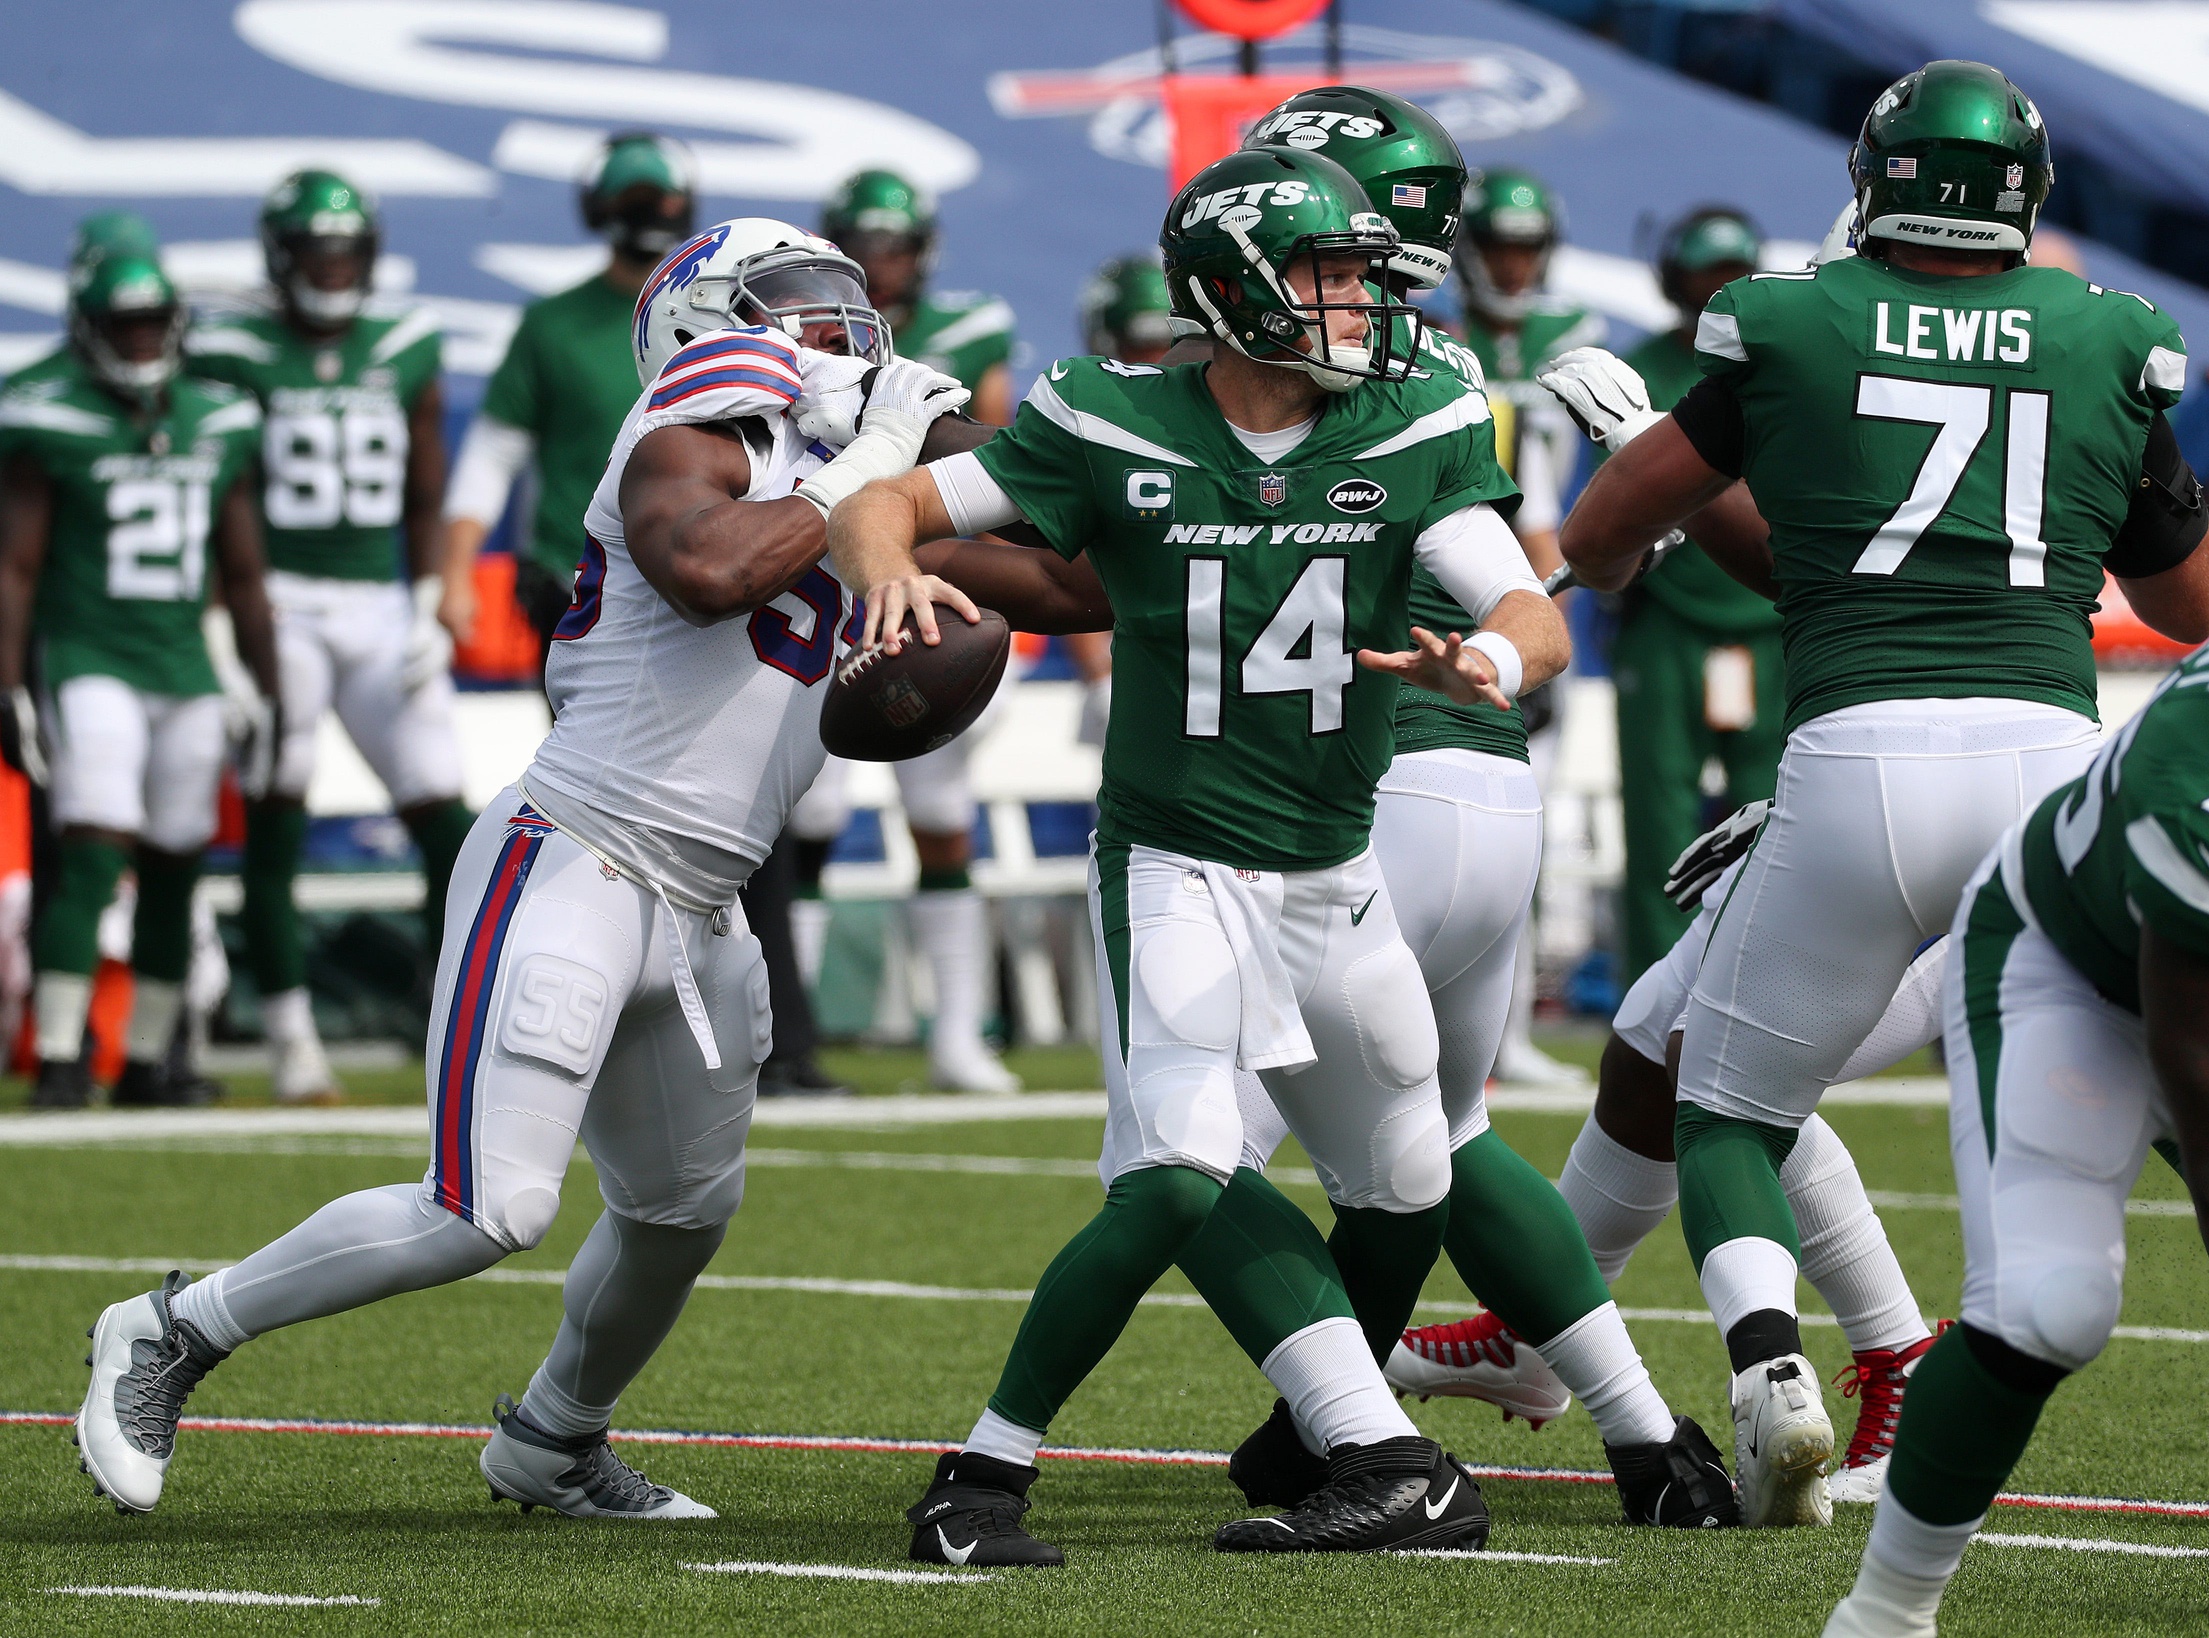 New York Jets: Sam Darnold has a believer in FS1's Colin Cowherd ...